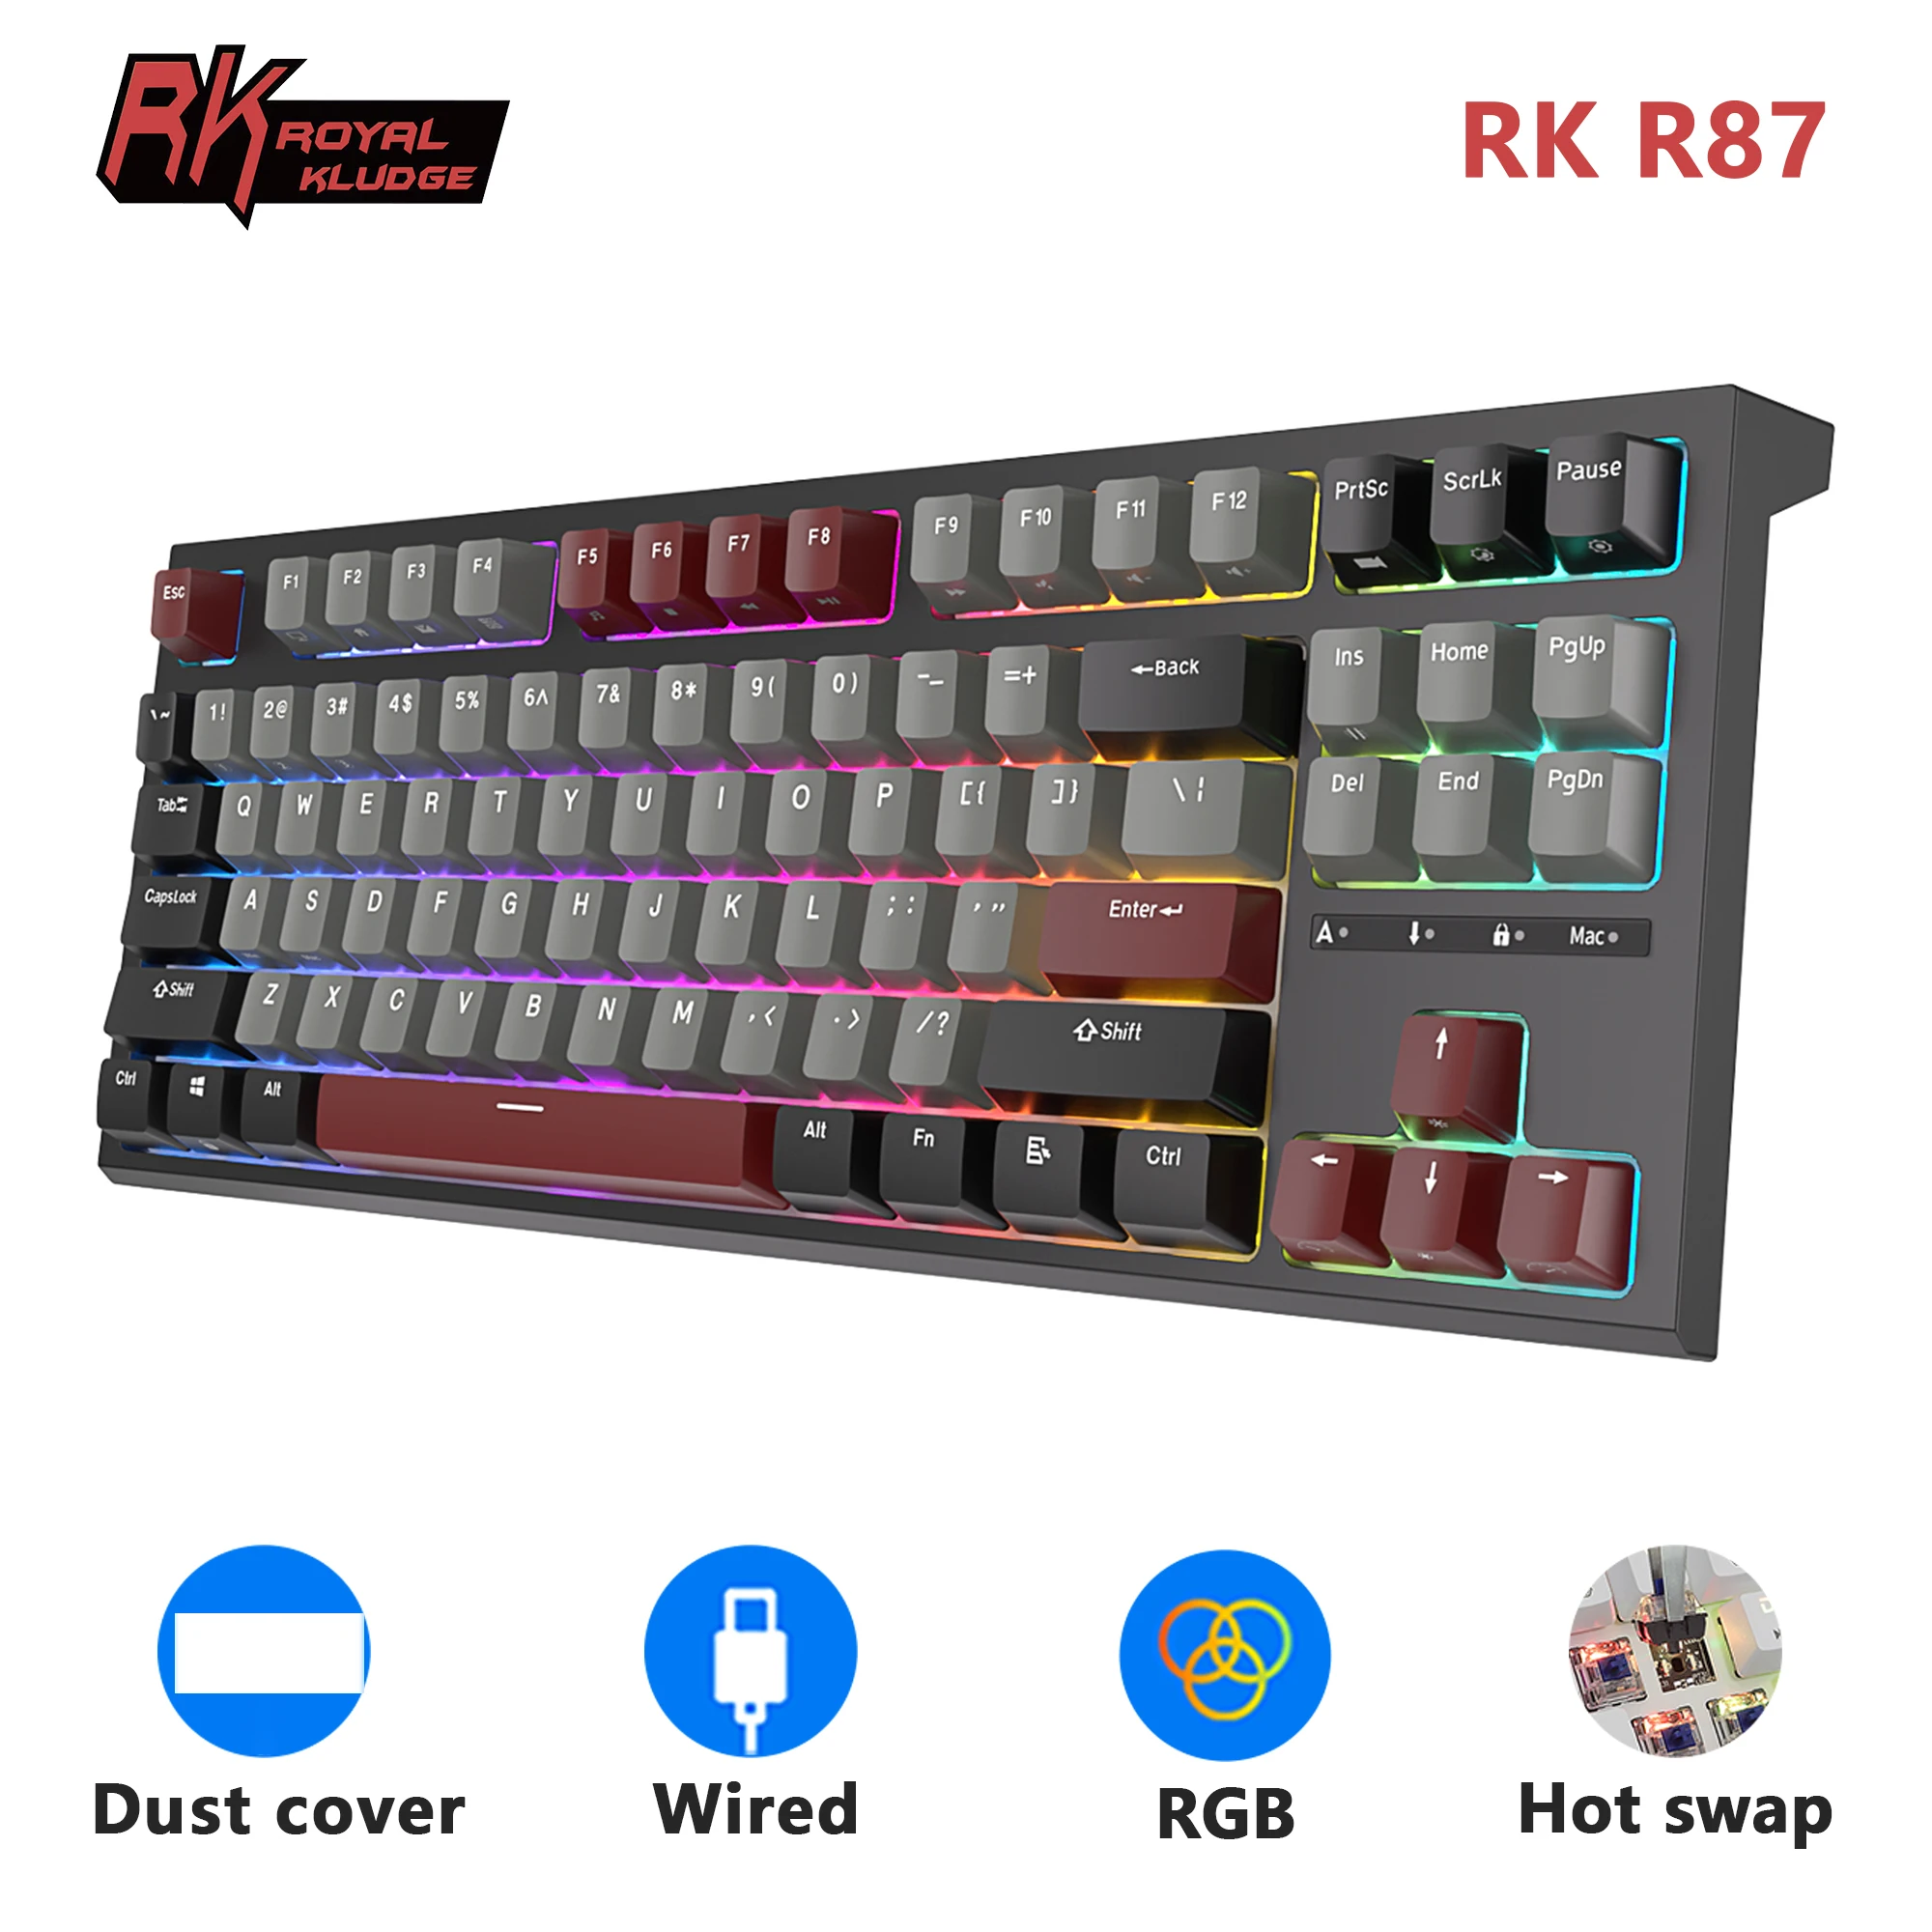 

RK ROYAL KLUDGE R87 Wired Mechanical Keyboard 87 Key RGB Backlit Hot-swappable Gamer Keyboard Customised Keycaps with Dust Cover